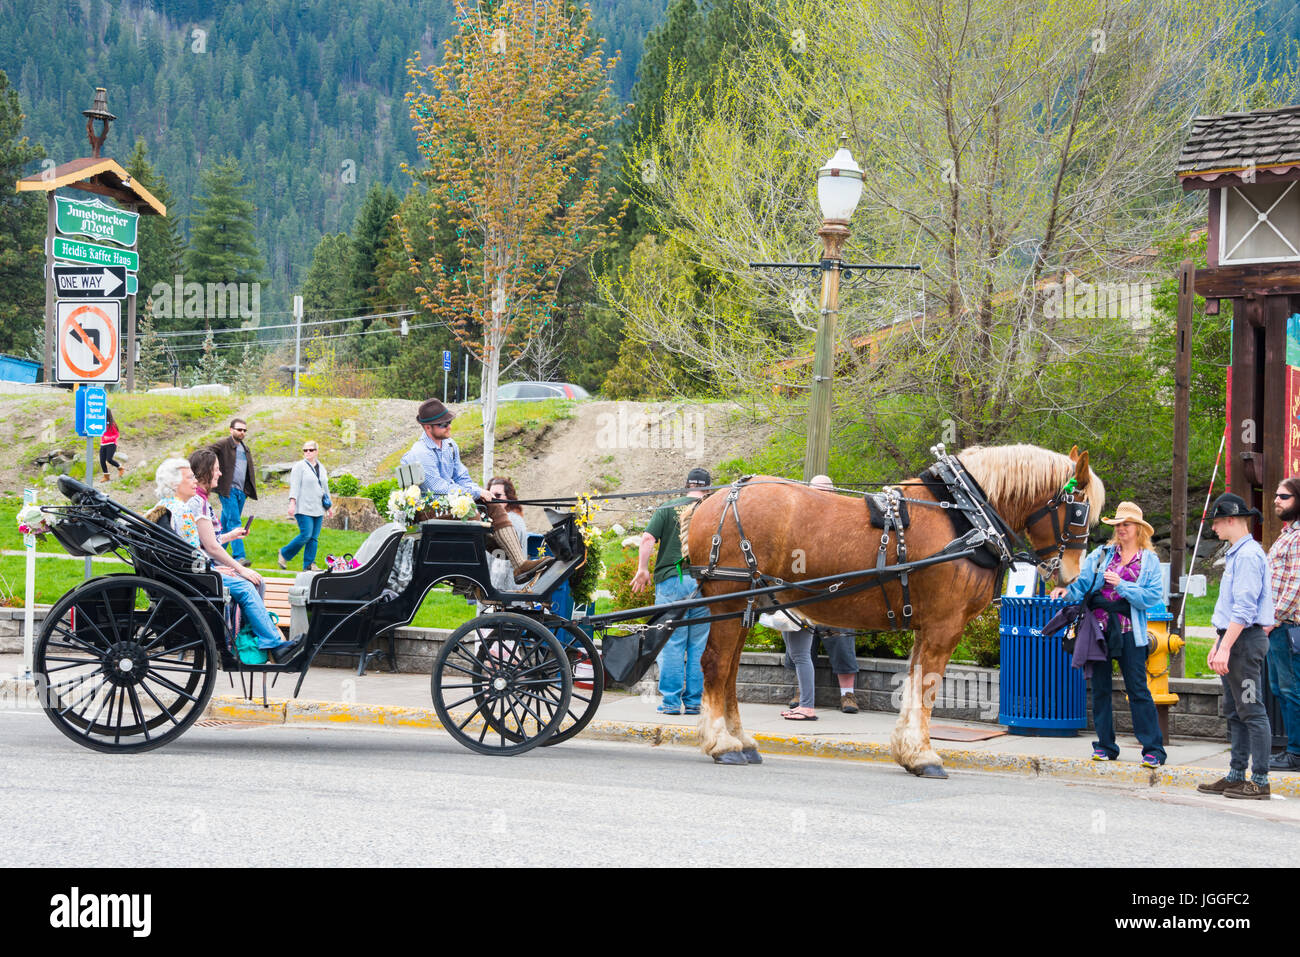 Carriage and horse with tourists and men in lederhosen in Bavarian Village of Leavenworth, Washington Stock Photo